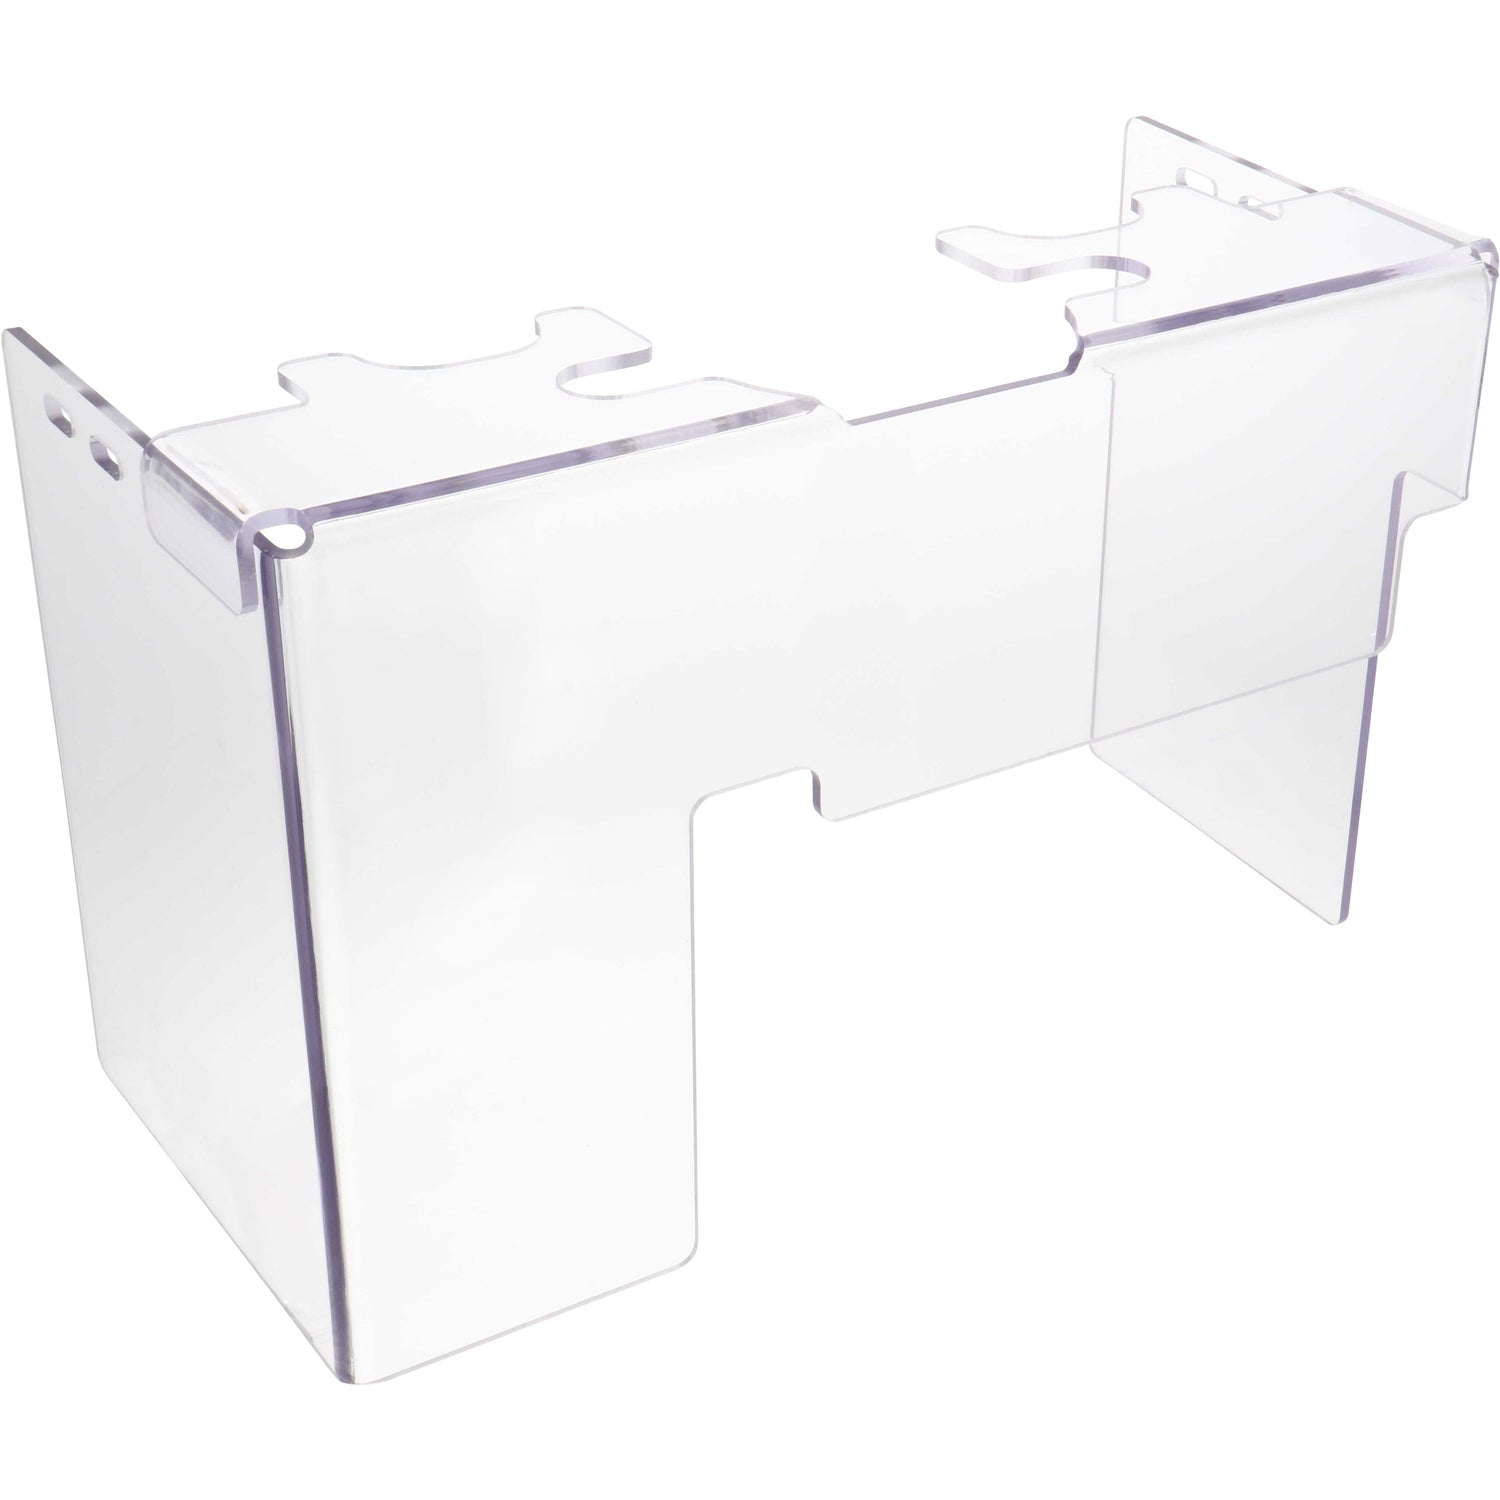 Clear bent polycarbonate guarding on a white background. S25